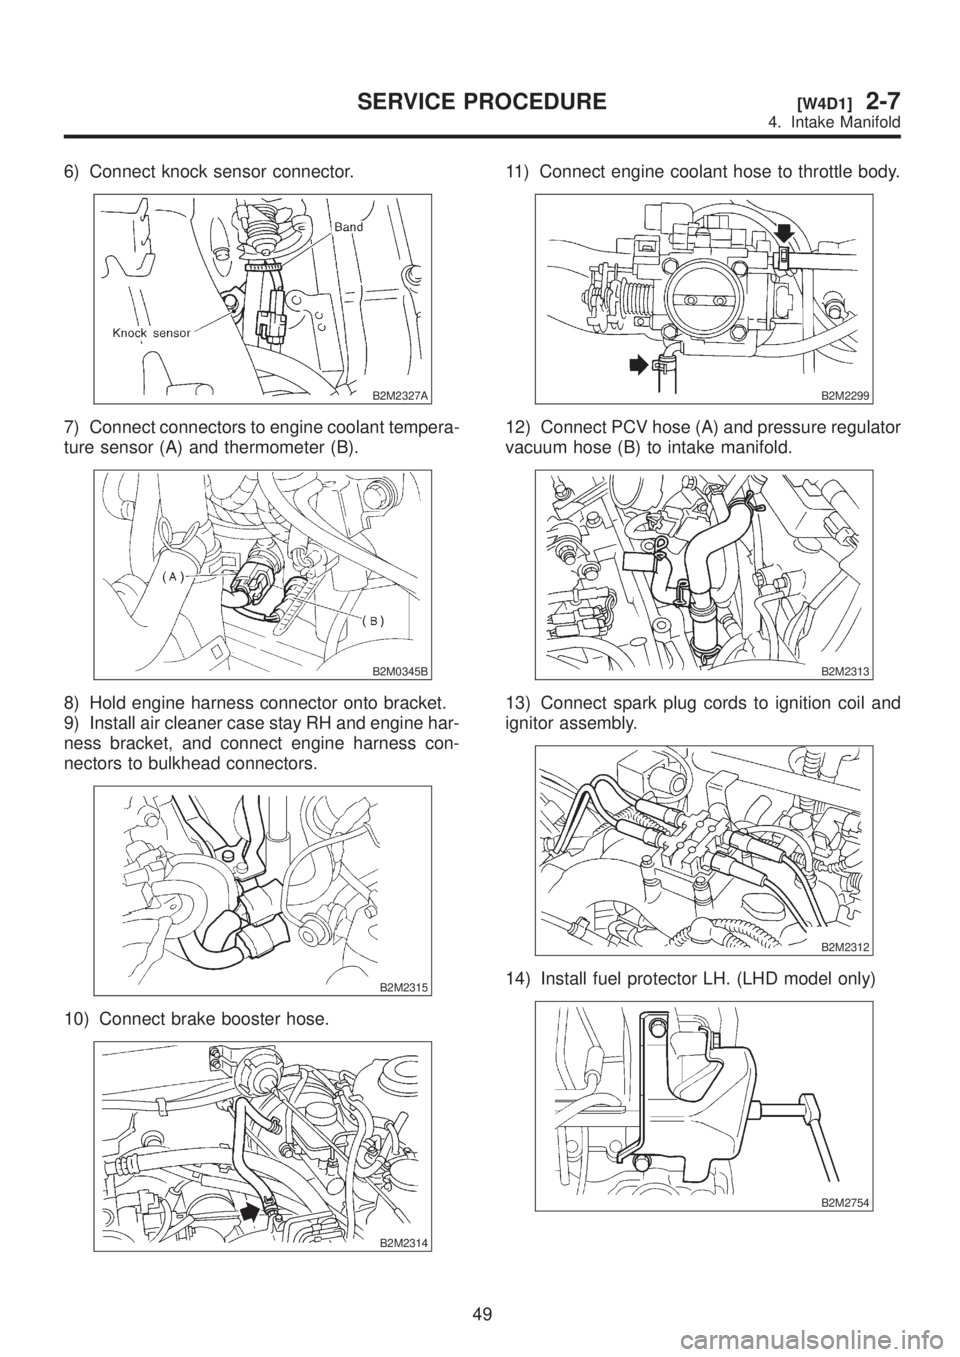 SUBARU LEGACY 1999  Service Repair Manual 6) Connect knock sensor connector.
B2M2327A
7) Connect connectors to engine coolant tempera-
ture sensor (A) and thermometer (B).
B2M0345B
8) Hold engine harness connector onto bracket.
9) Install air